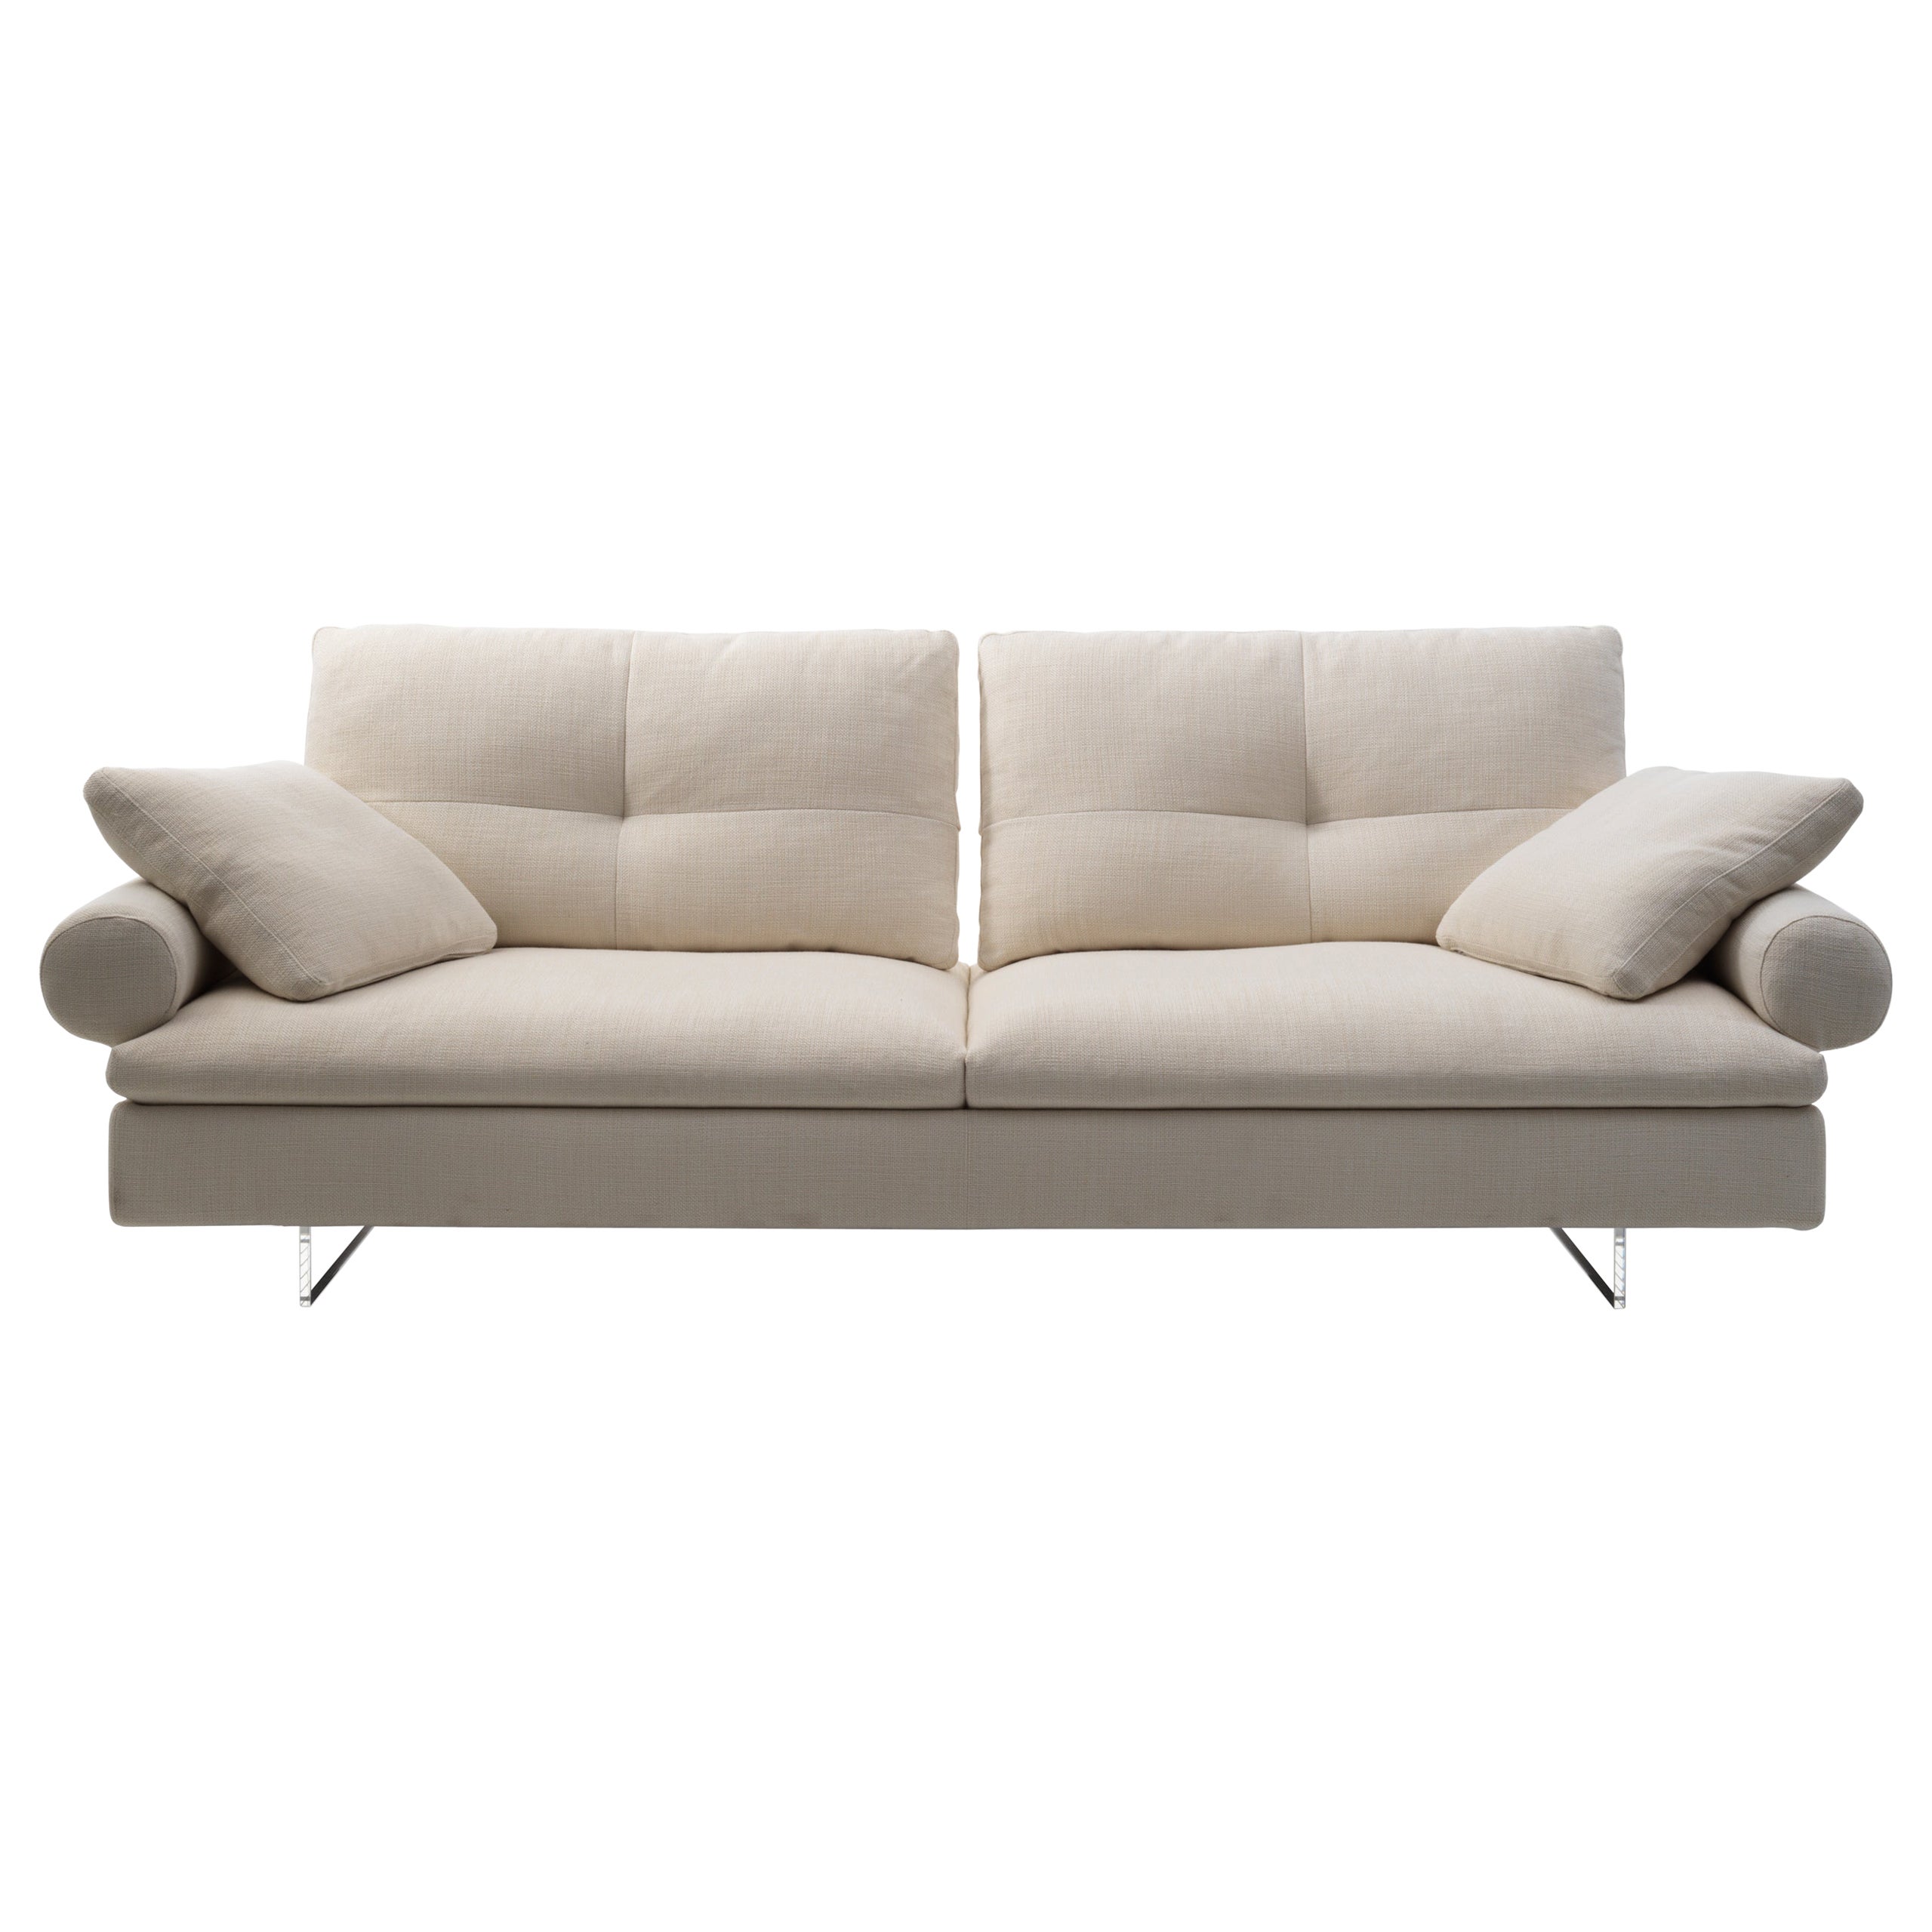 Limes New Sofa in Avant Après Upholstery and Armrest with Roll by Sergio Bicego For Sale